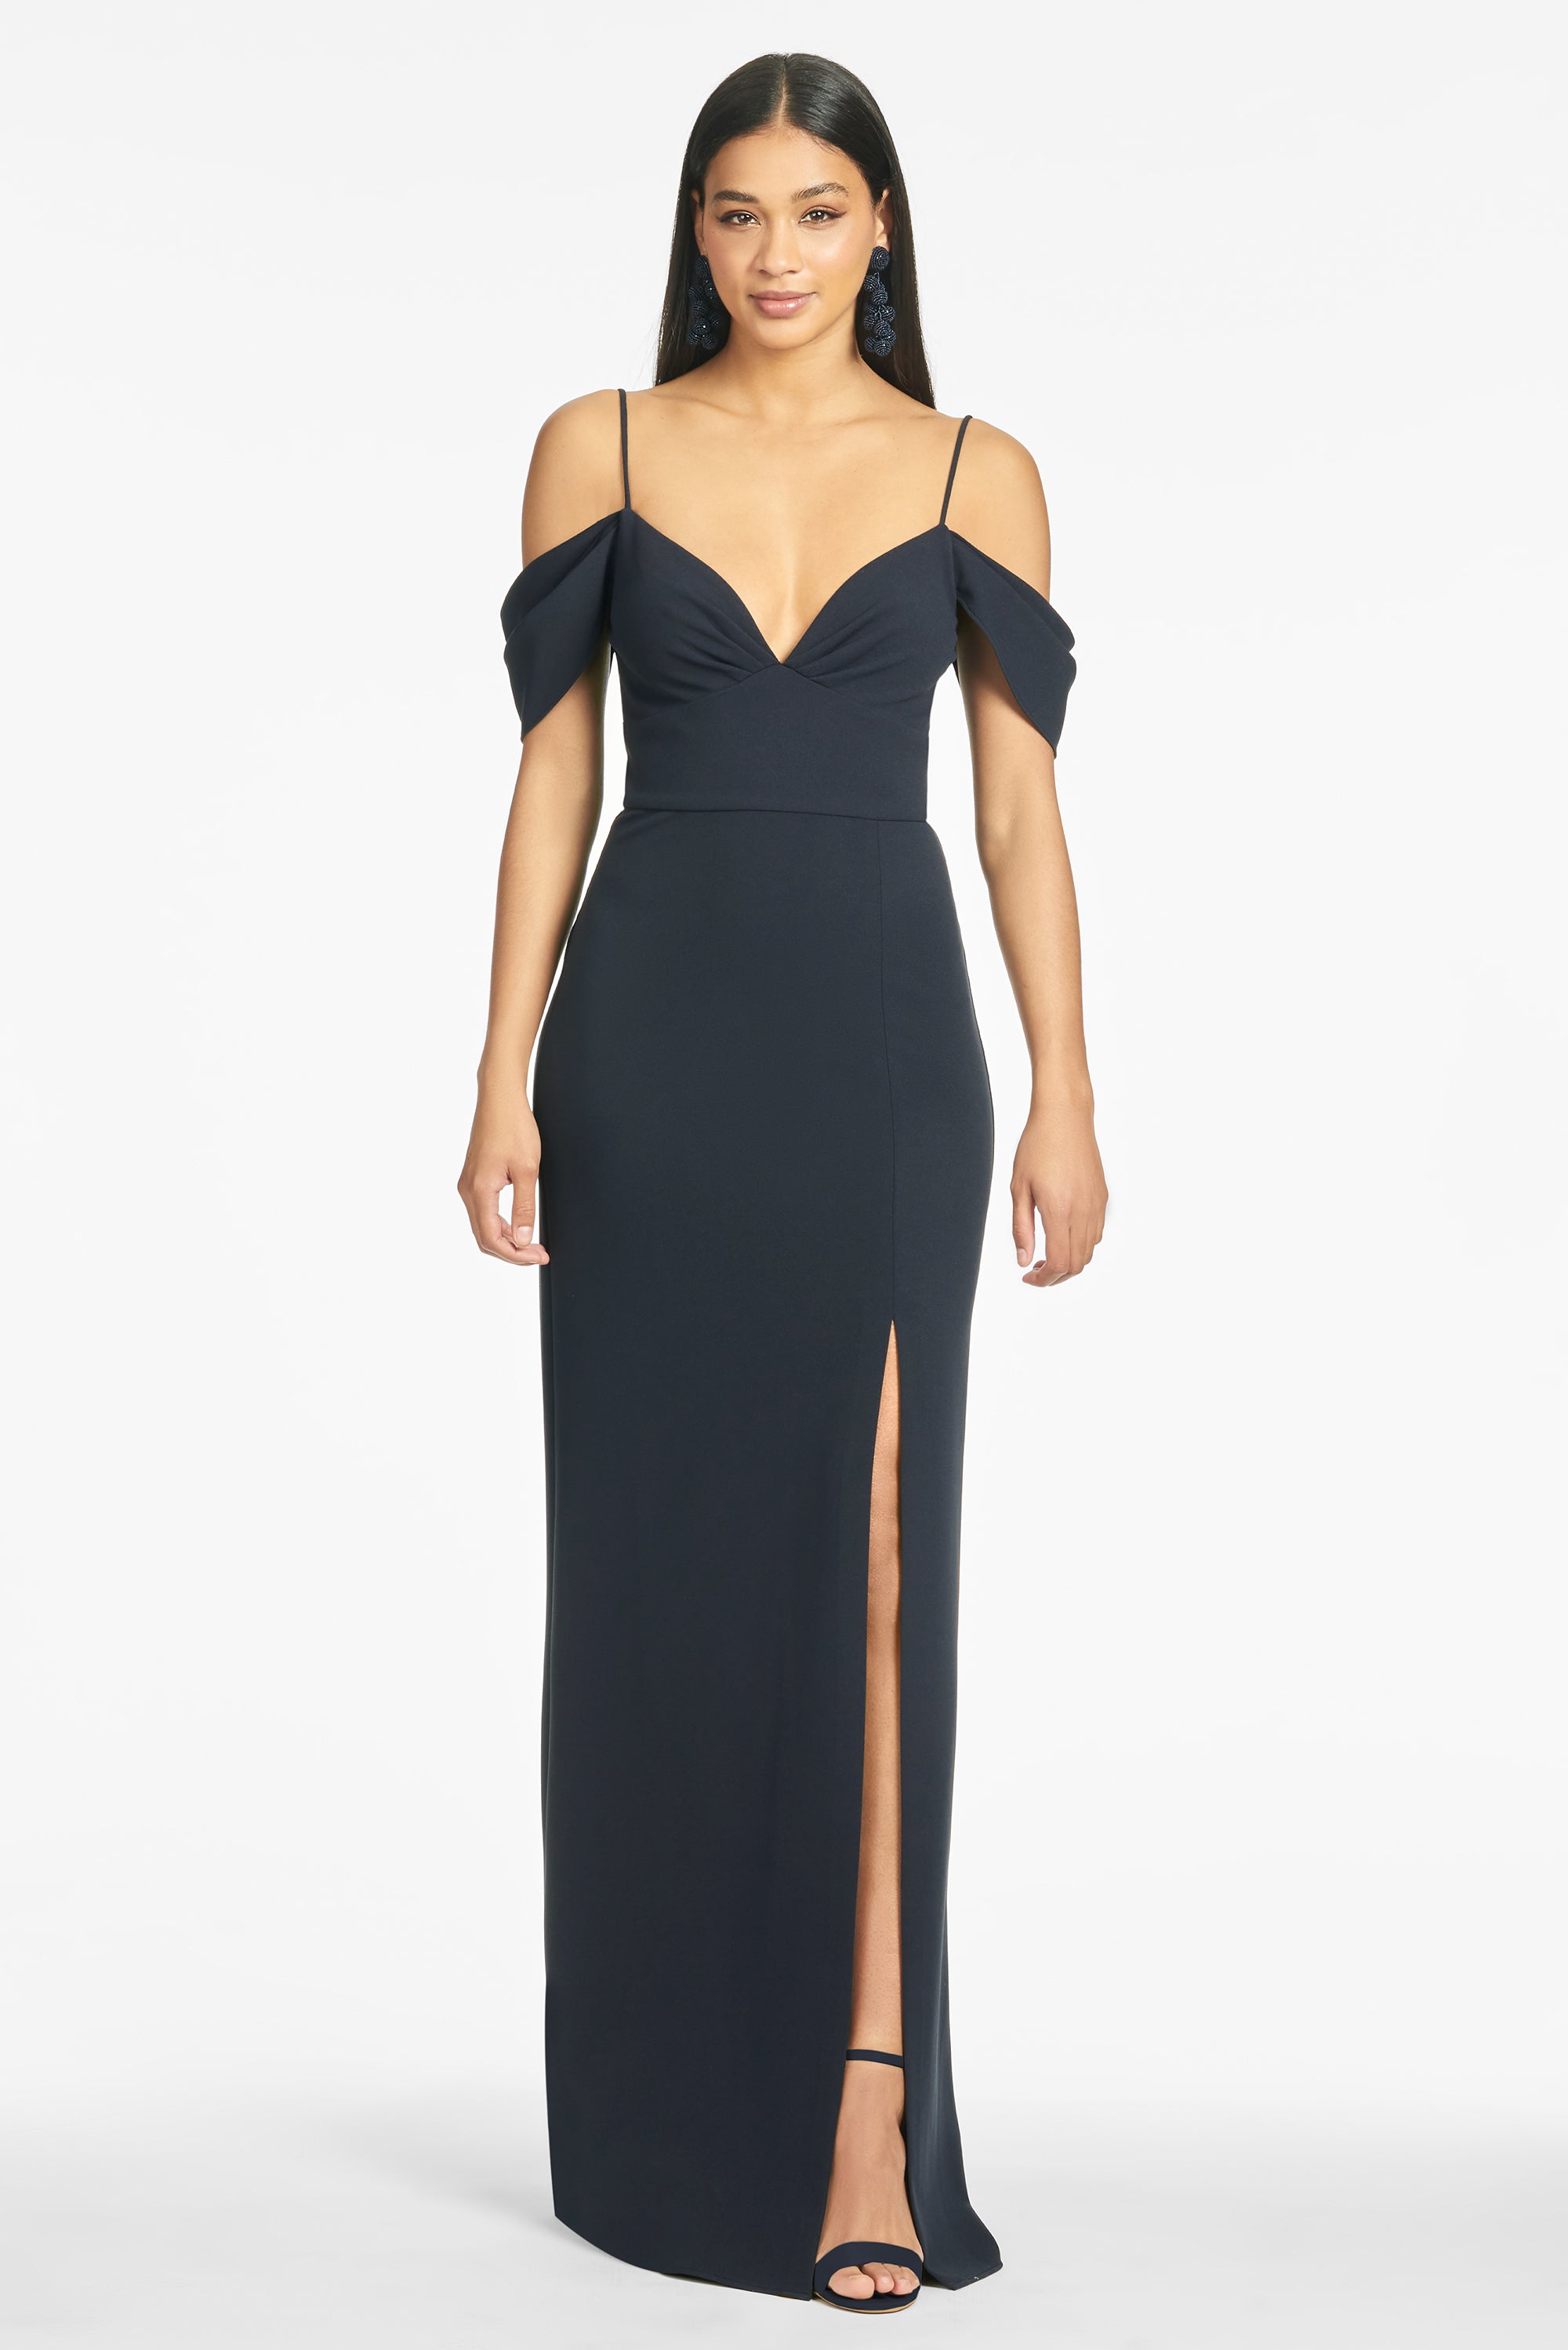 Brittany 4-Way Stretch Crepe Gown  - Navy - Final Sale